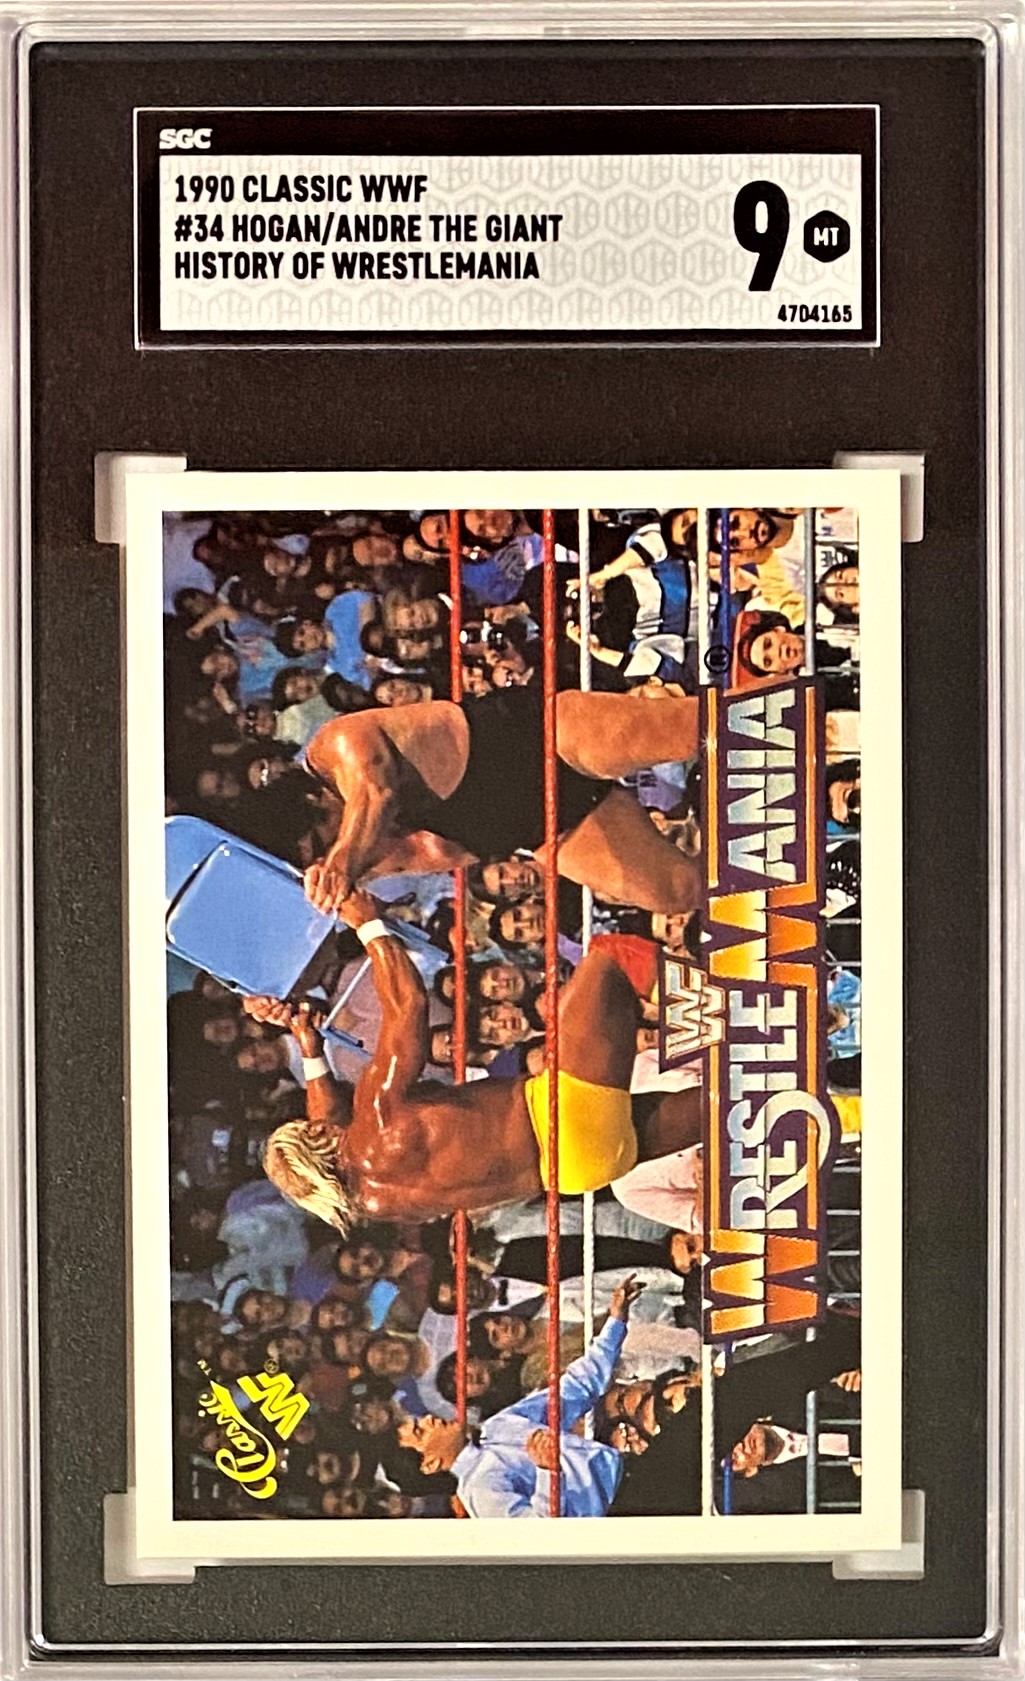 Hulk Hogan & Andre the Giant 1990 Classic WWF The History of ...